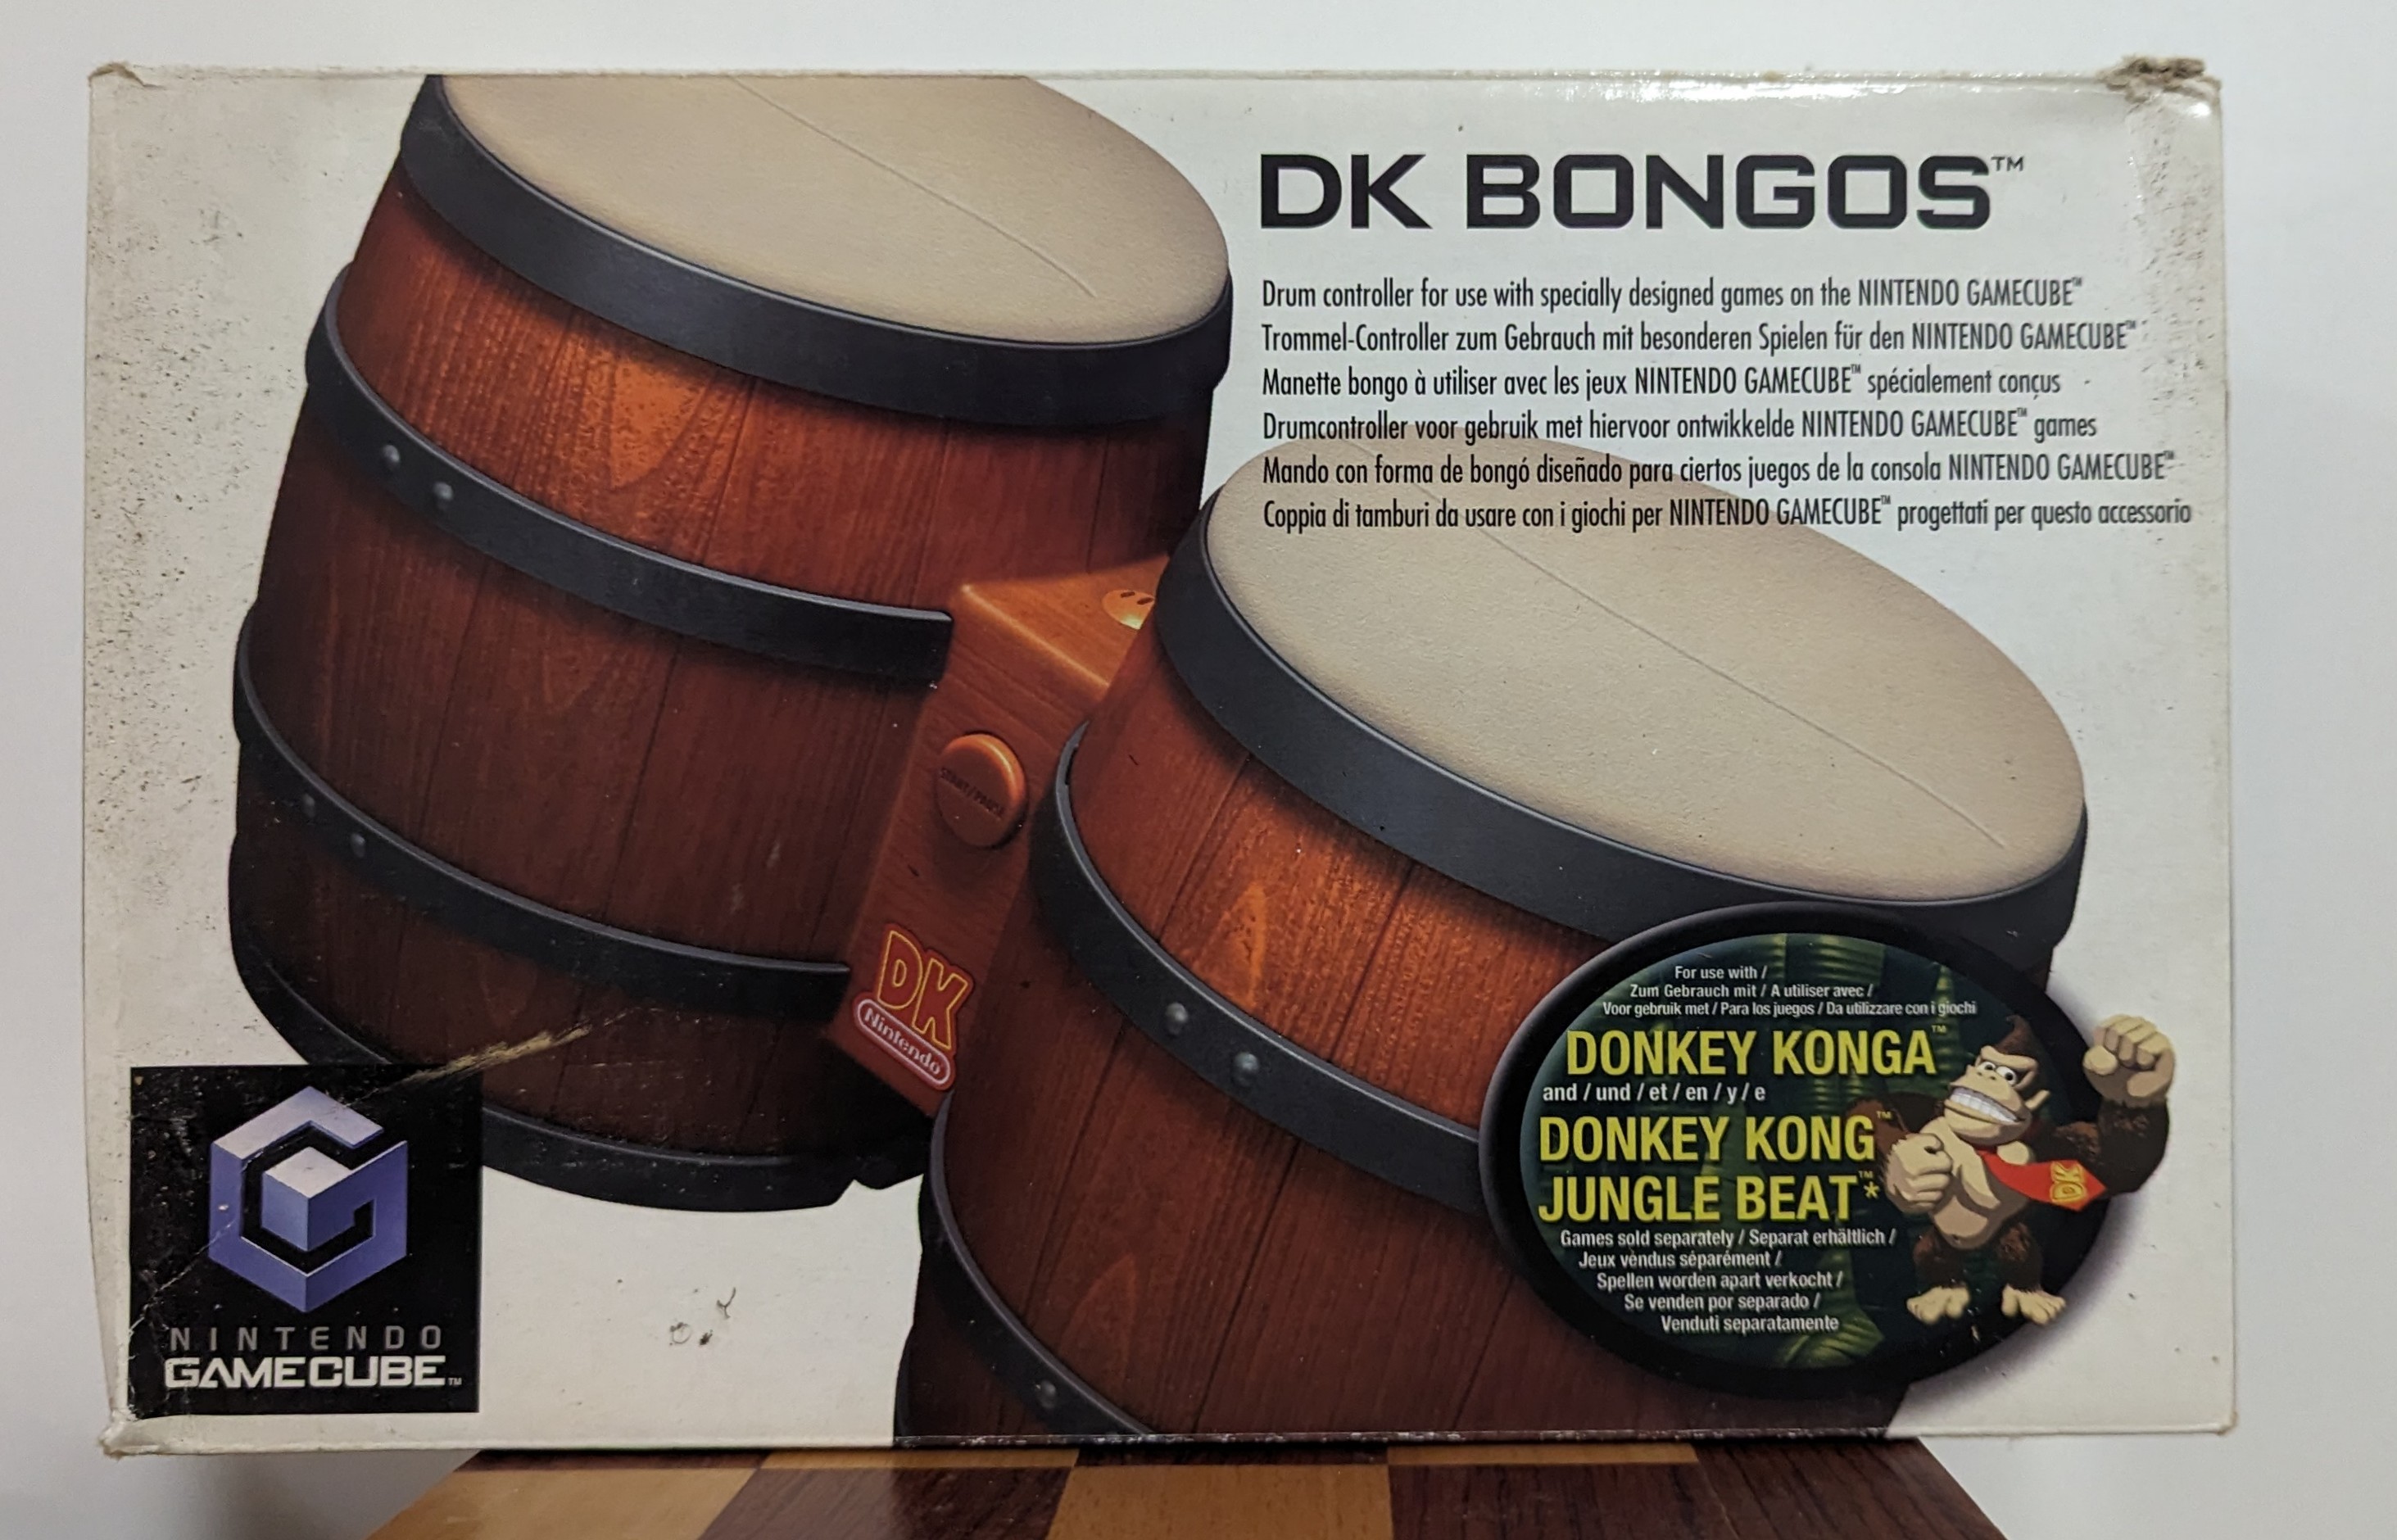 The box for DK (Donkey Kong) Bongos that connected to the Nintendo GameCube. The bongos are recognised controllers for the Donkey Konga and Donkey Kong Jungle Beat games for the Nintendo GameCube.